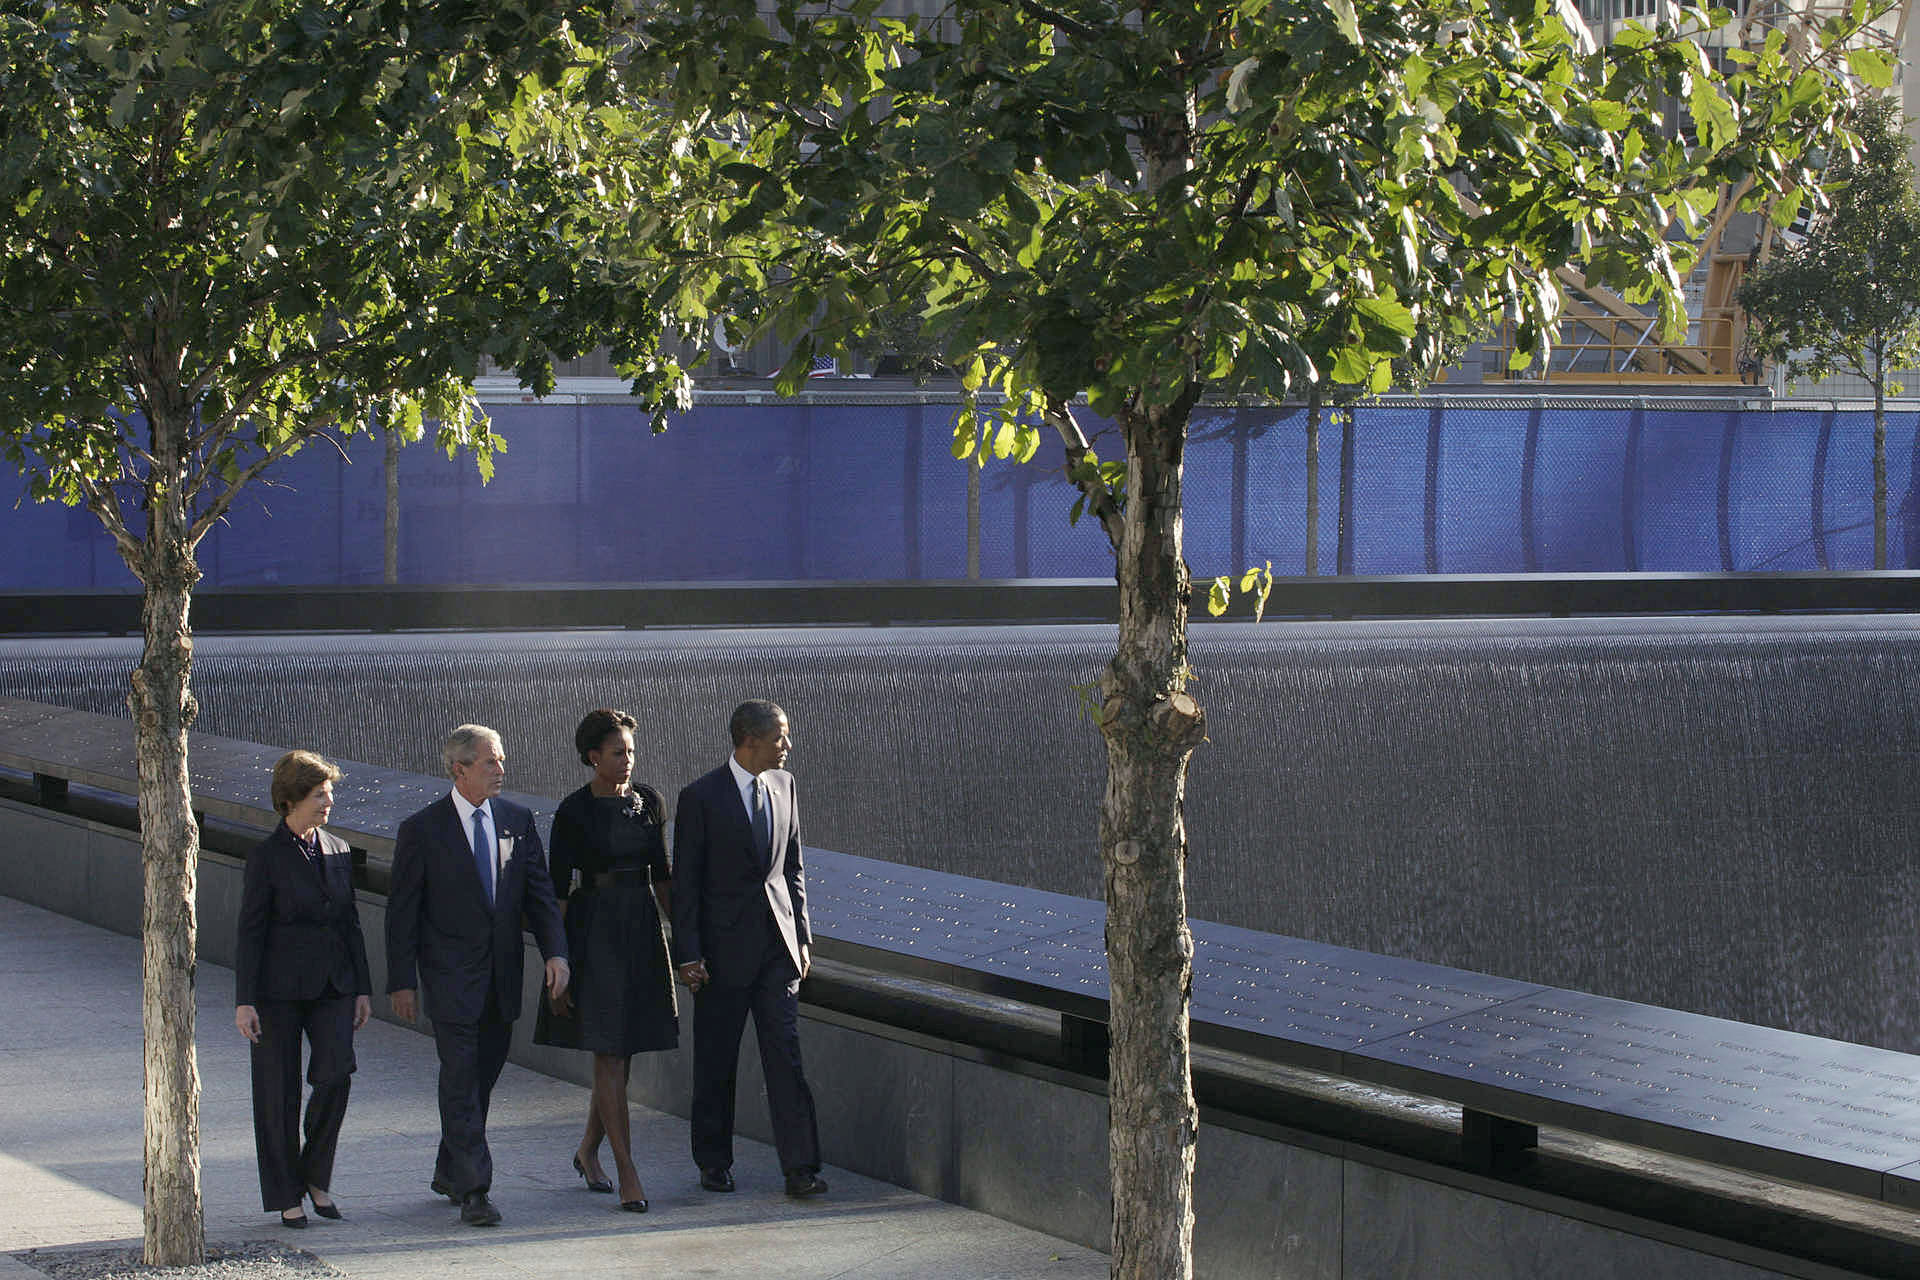 President Barack Obama and First Lady Michelle Obama, former President George W. Bush and former First Lady Laura Bush at the National September 11 Memorial 